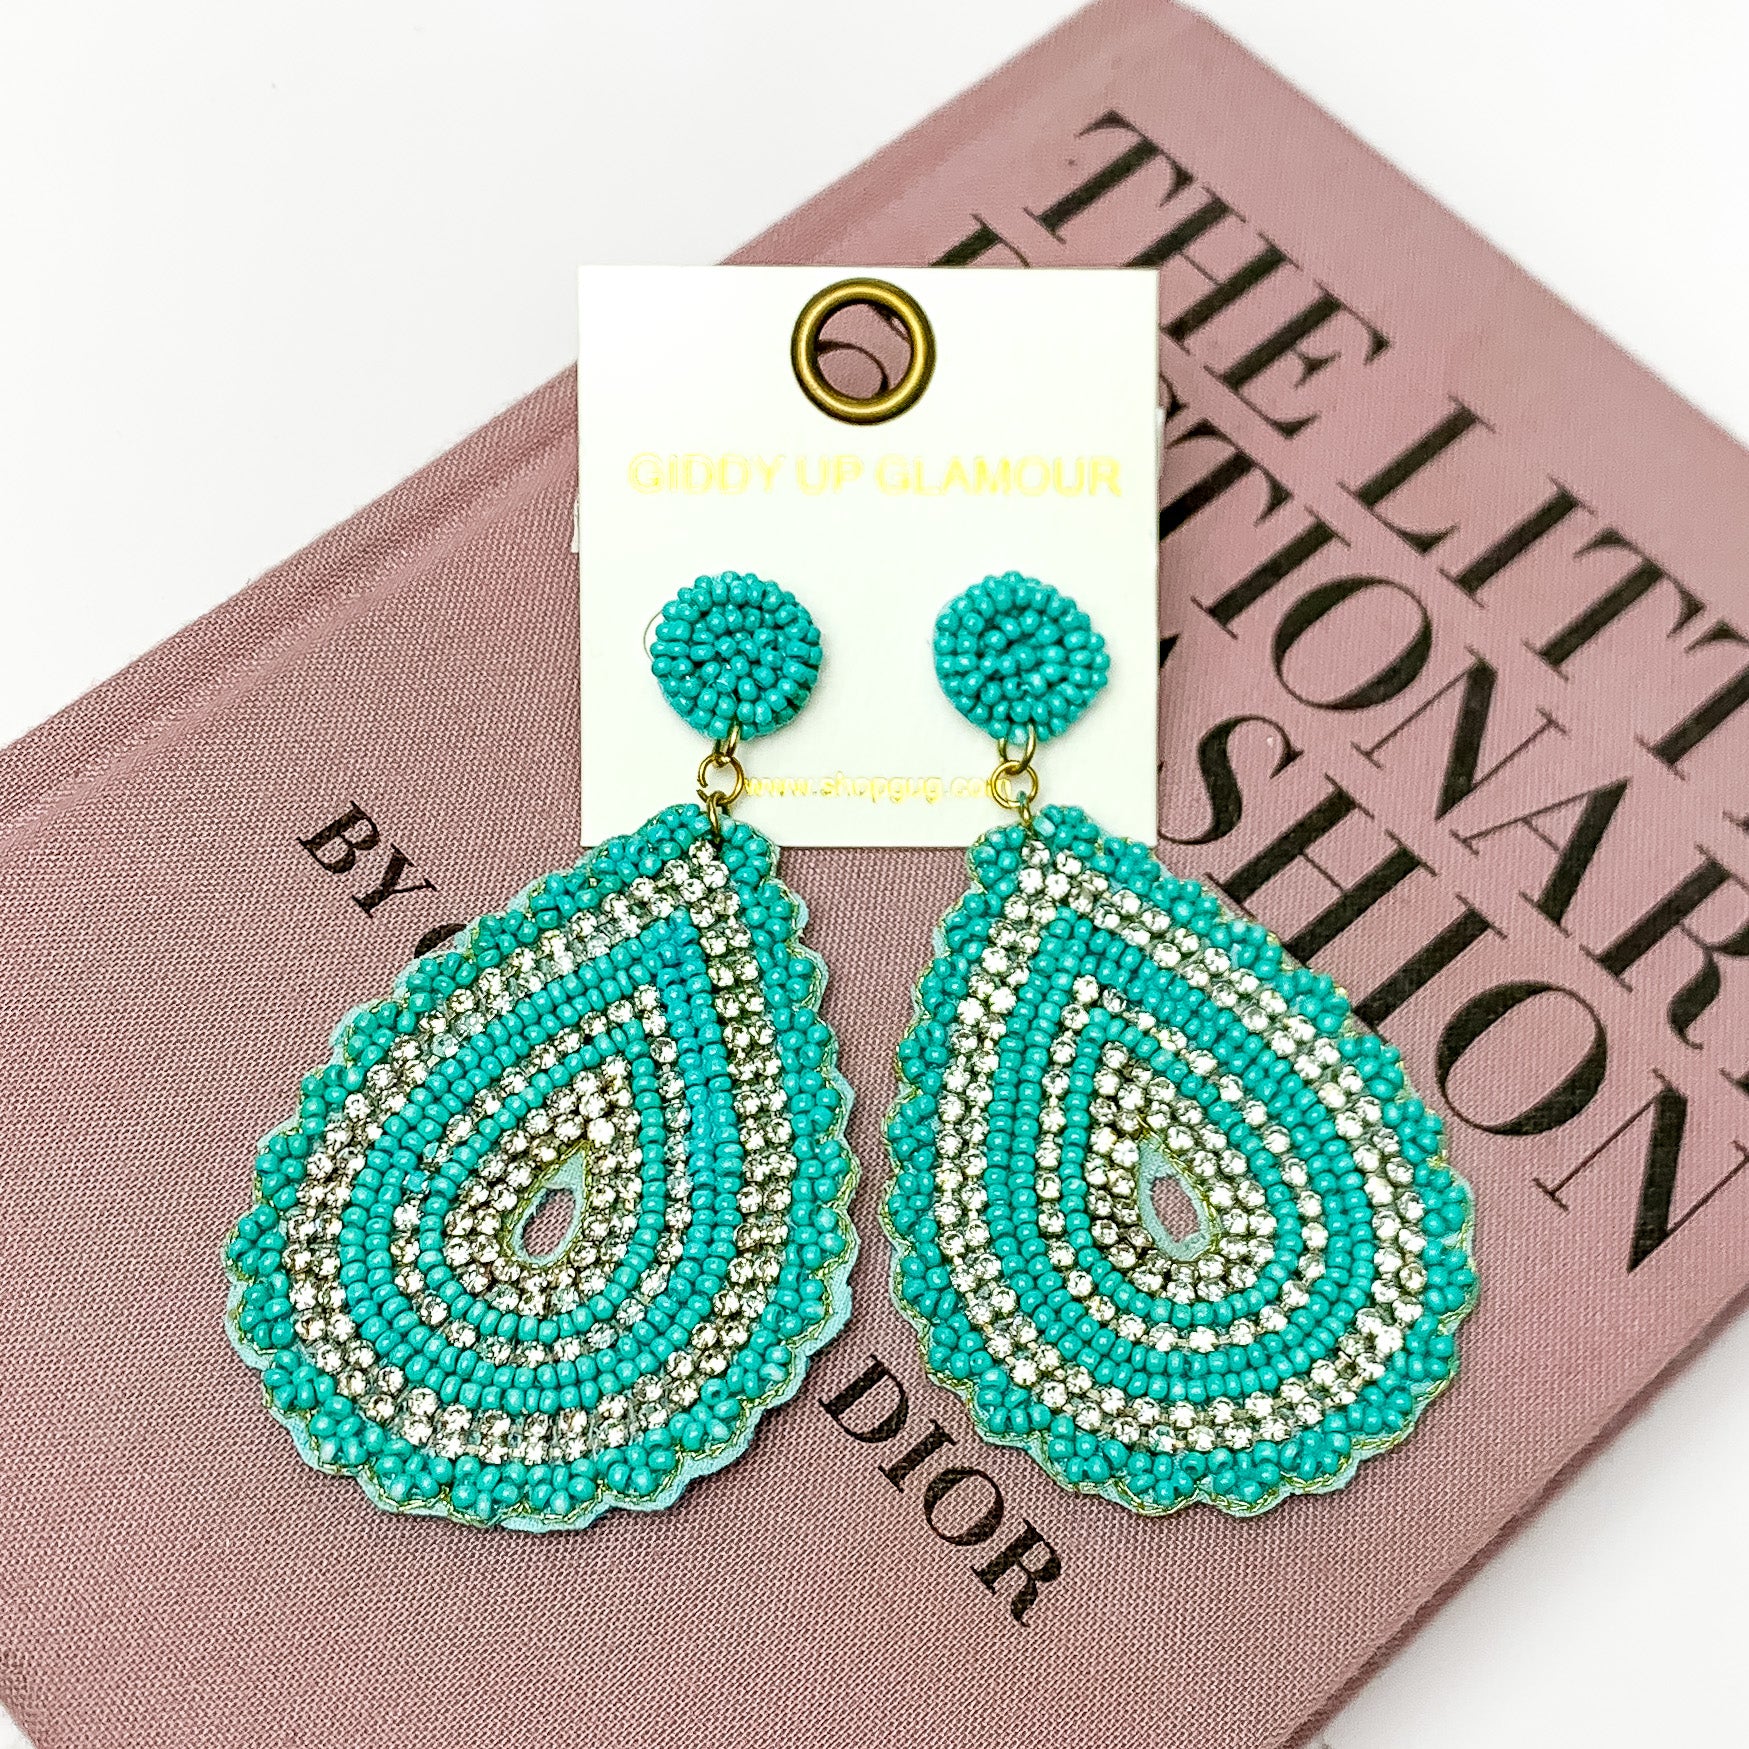 Sound Wave Beaded Teardrop Earrings with Clear Crystals in Turquoise